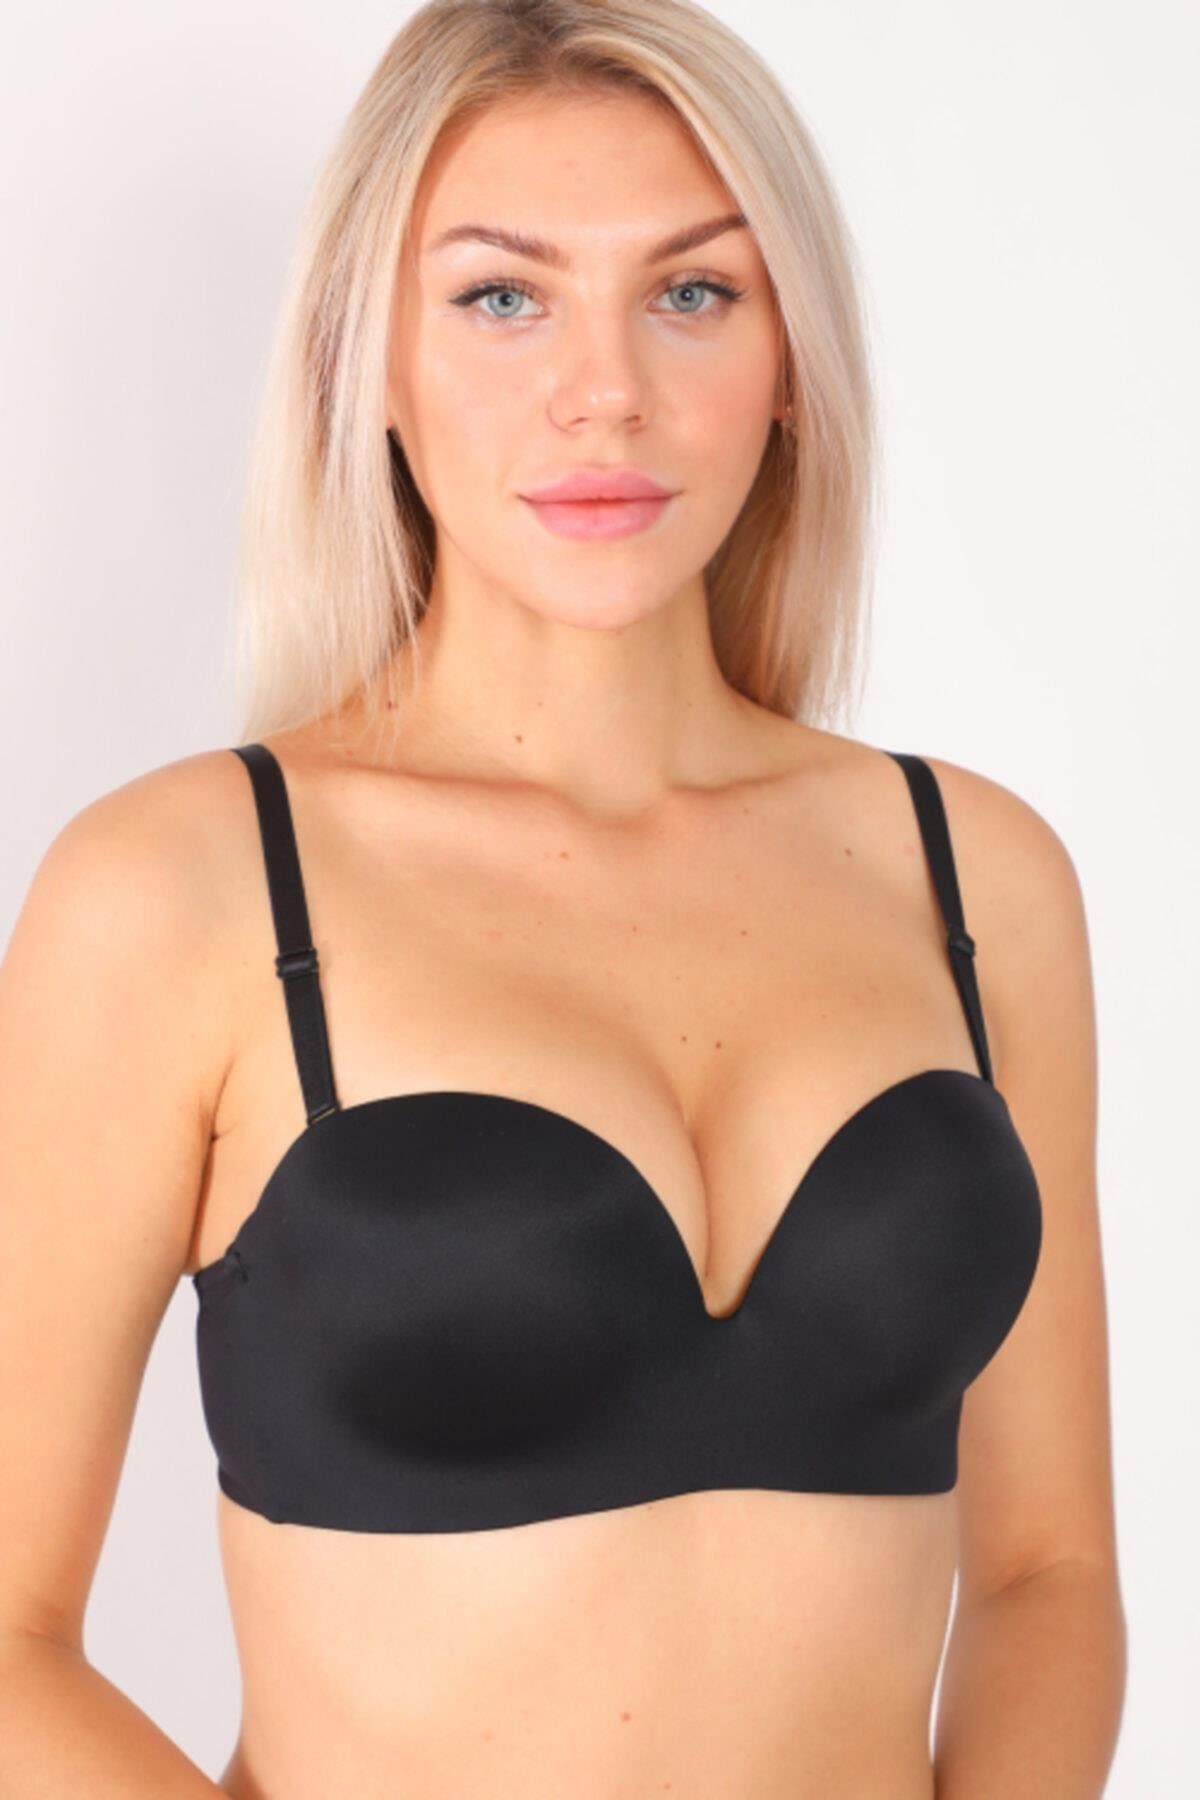 SEBOTEKS Women's Black Laser Cut Double Supported B Cup Strapless Bra 01141